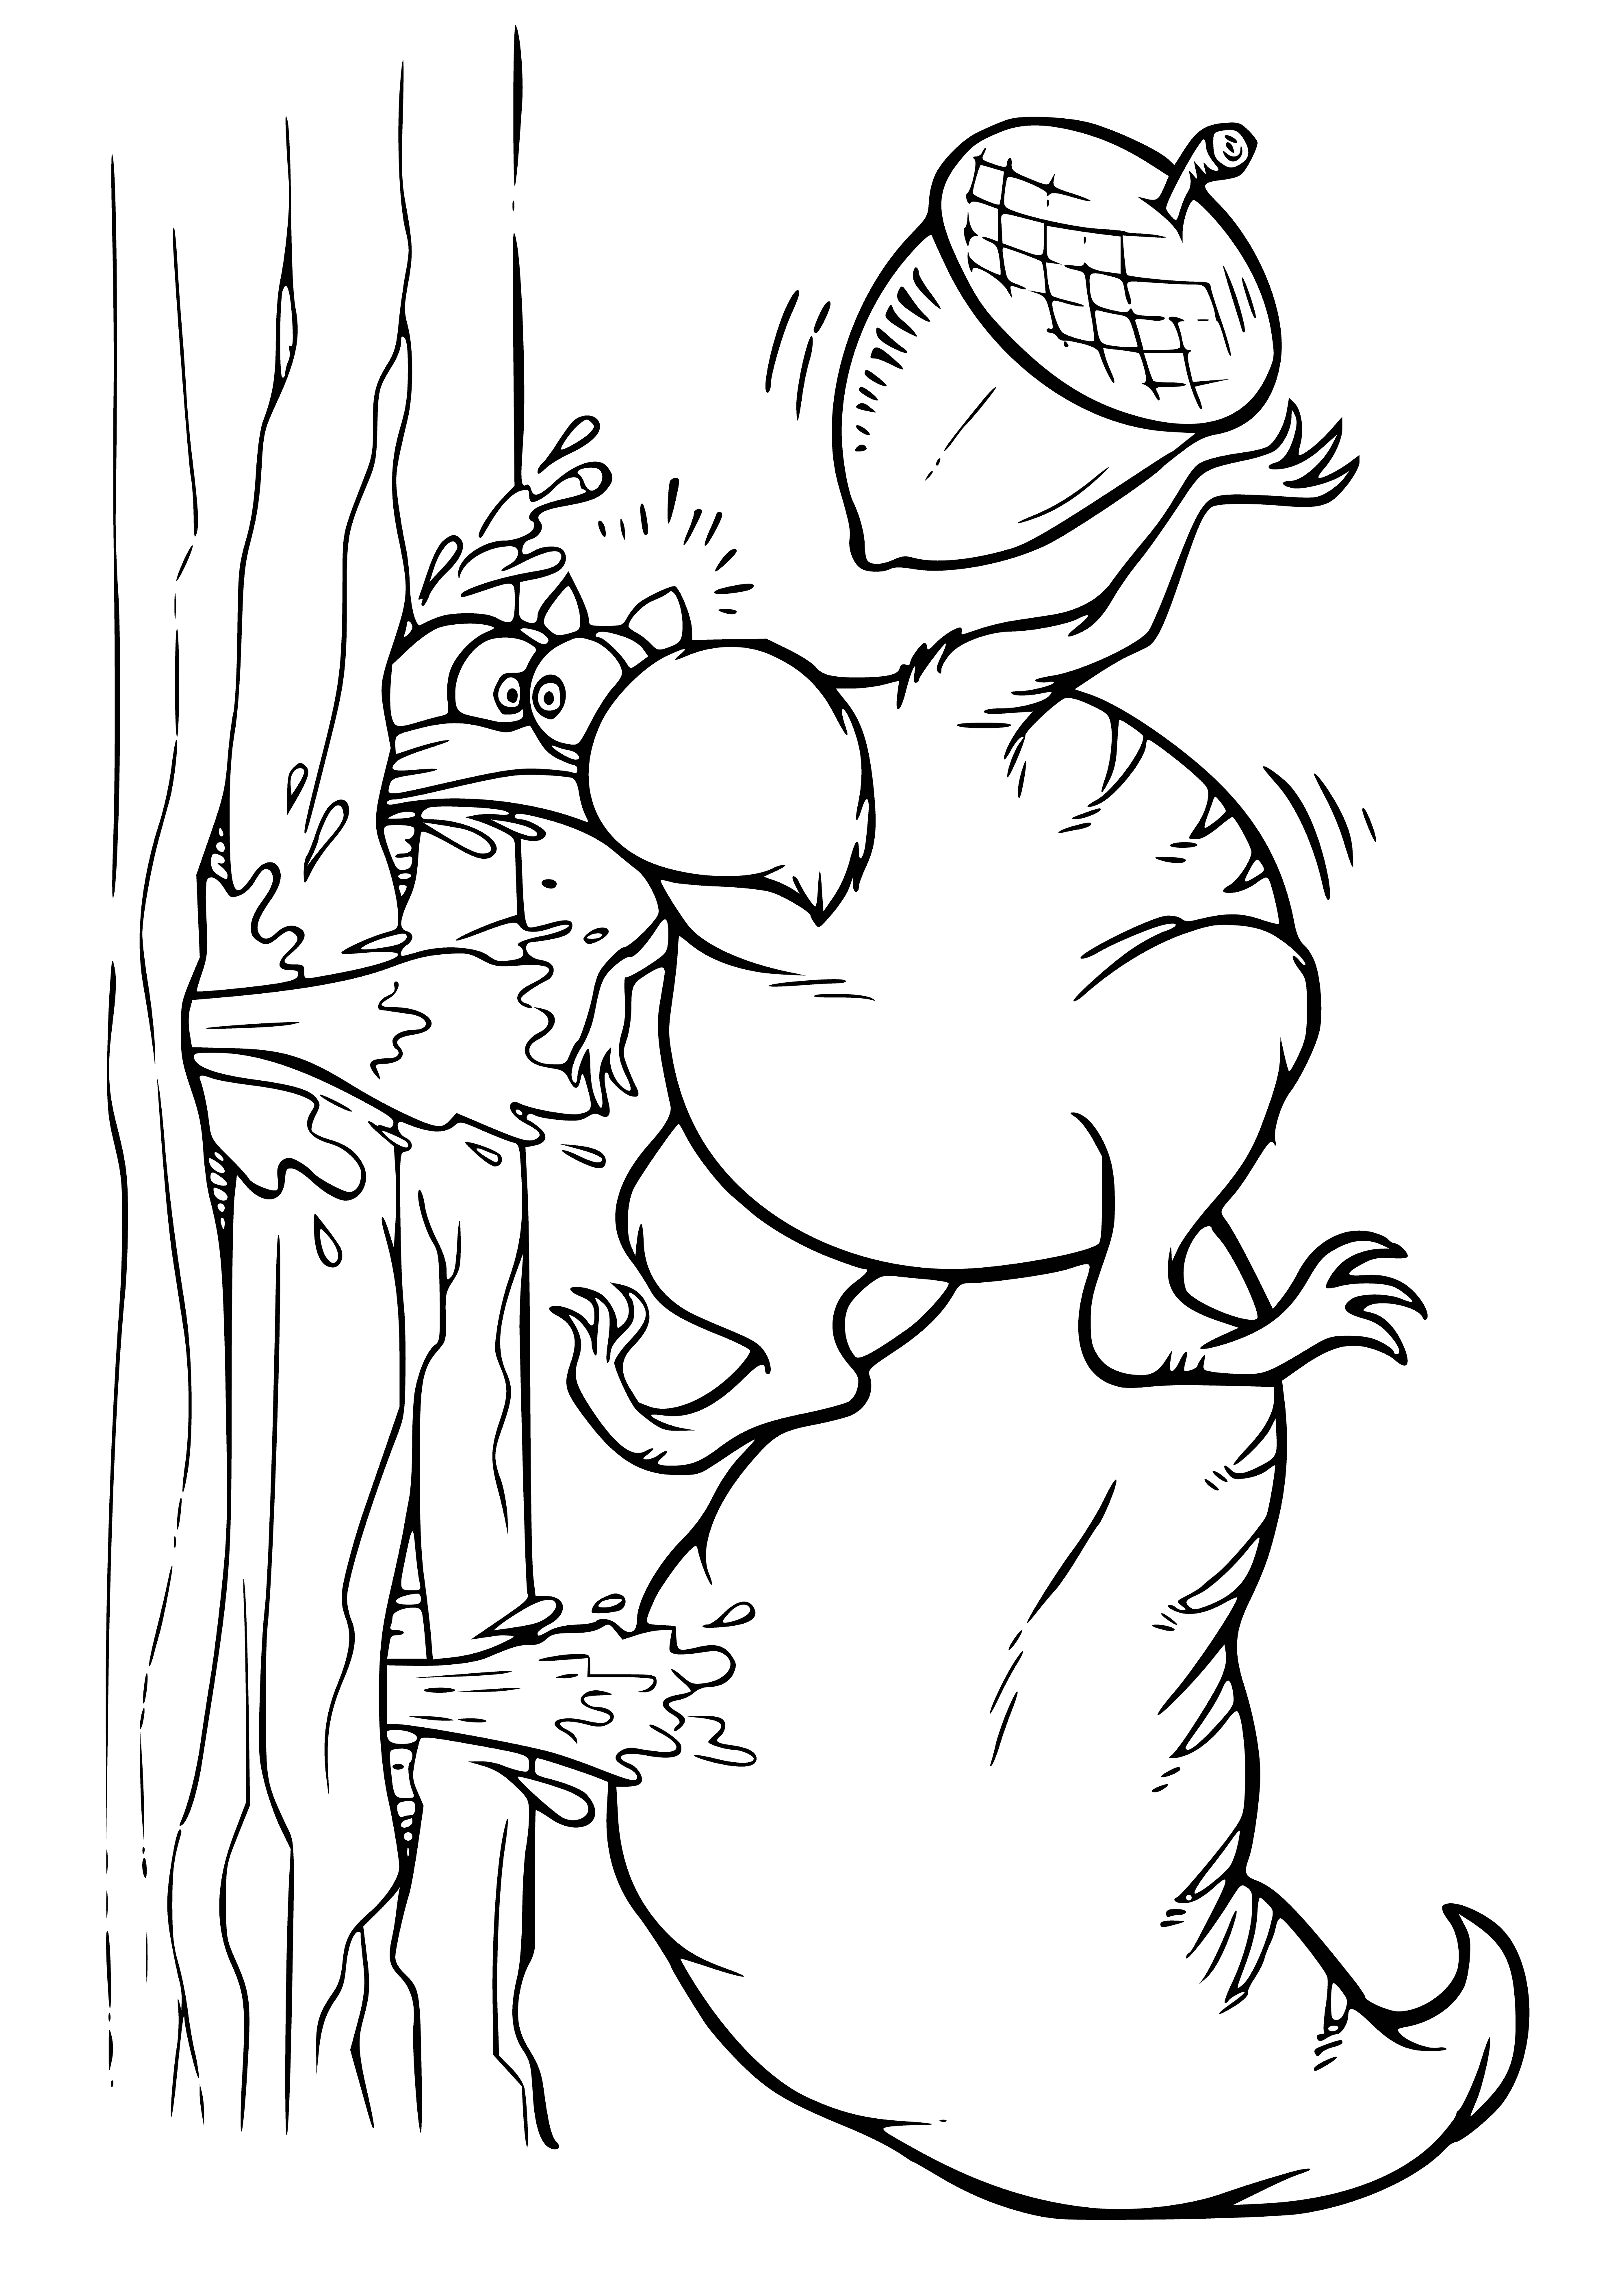 coloring page: Squirrel Scrat's trying to get an acorn from block of ice in this coloring page!